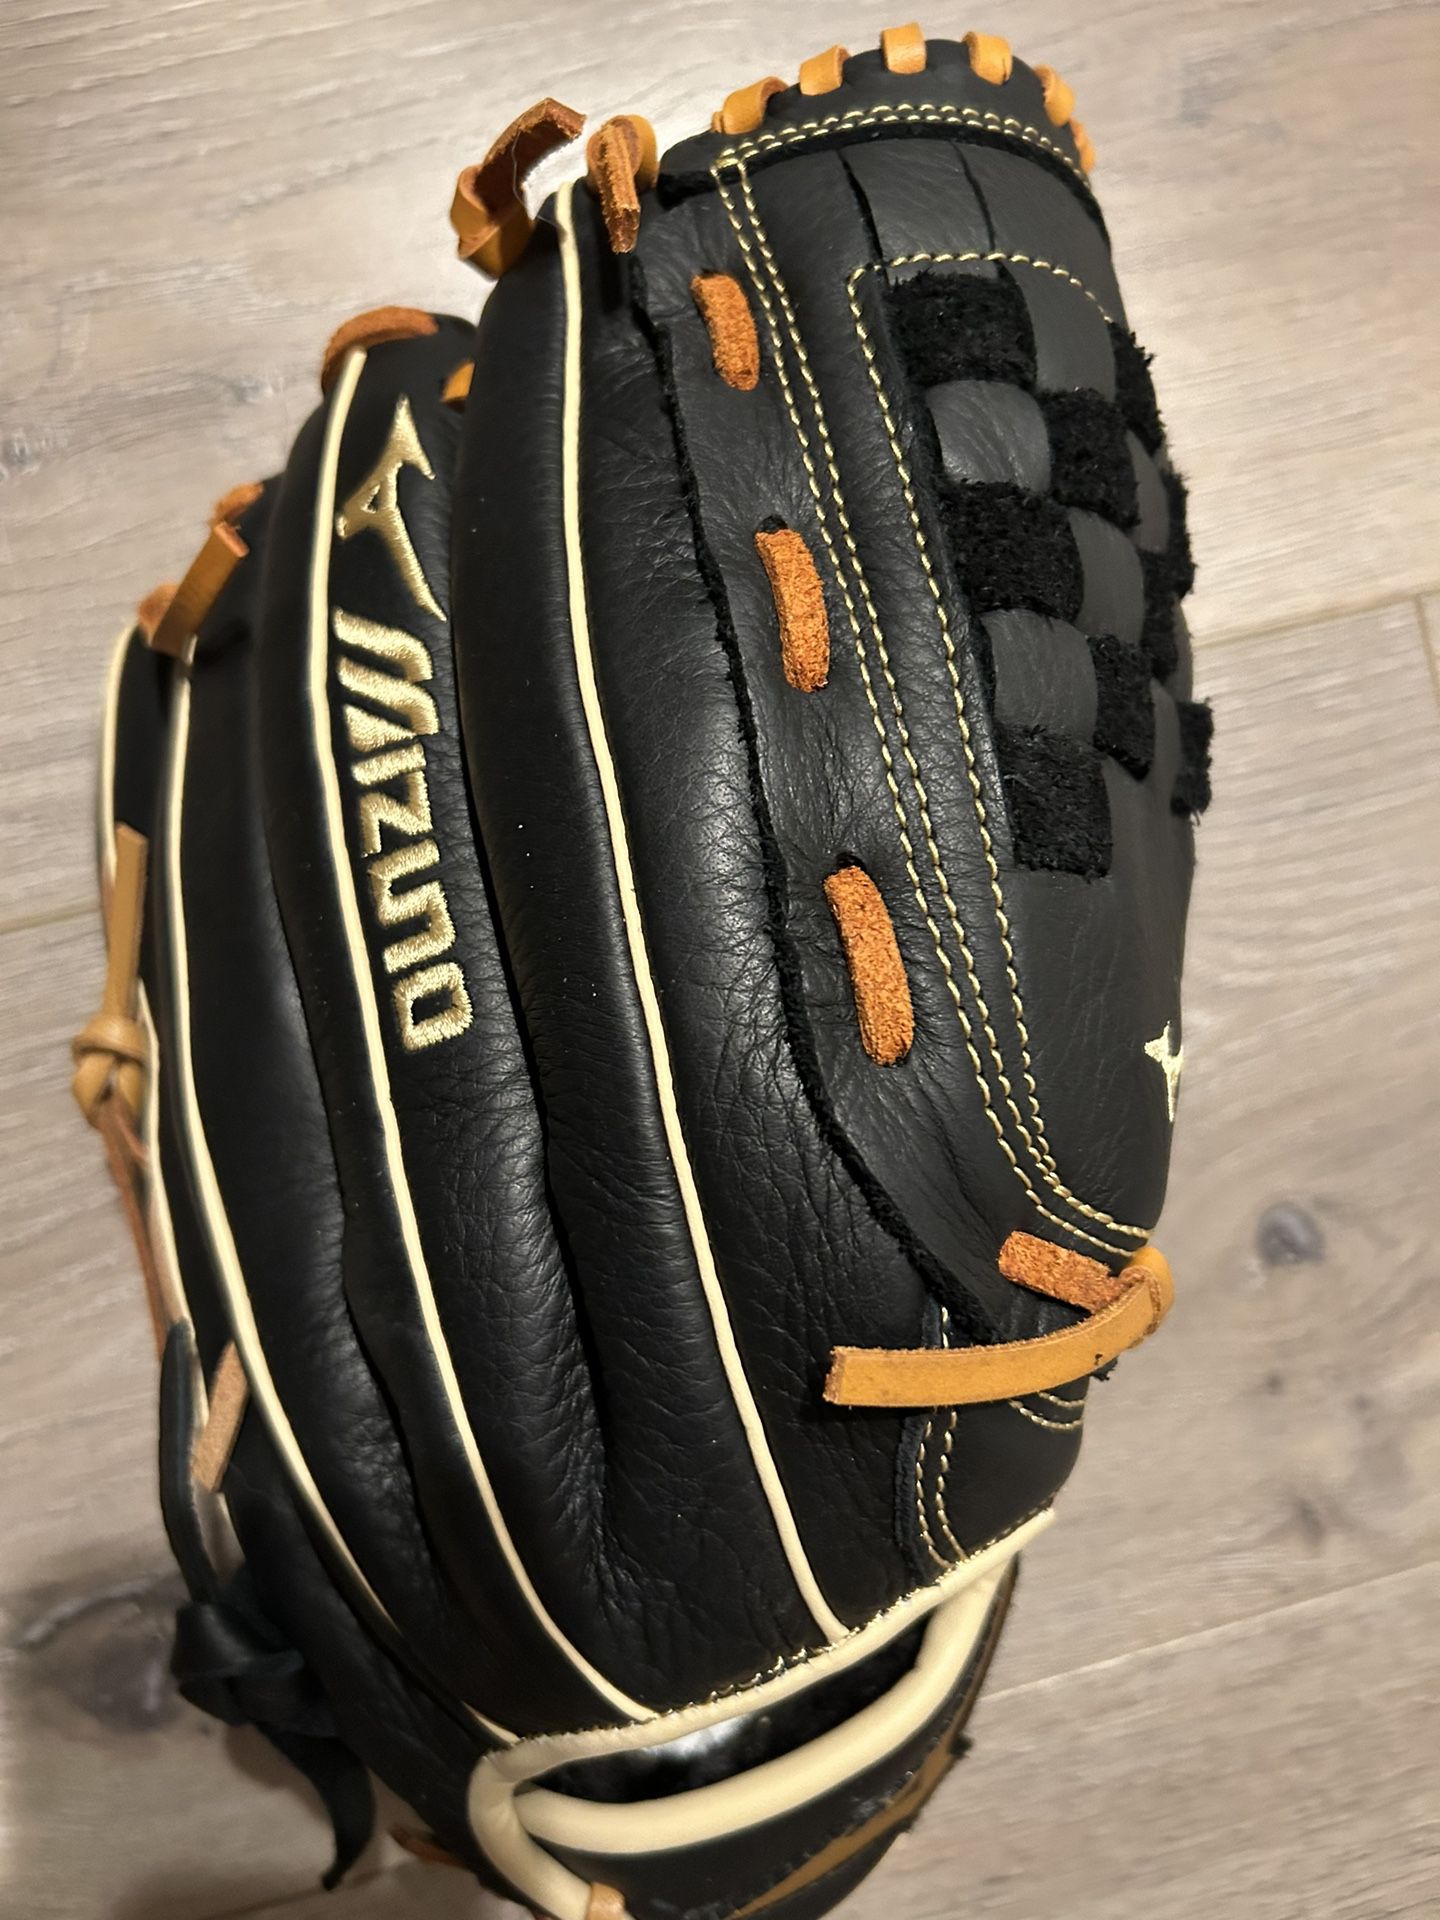 New Mizuno Youth 12” Inch Prospect Select Baseball Glove “Butter Soft” Inner Lining Little League World Series Quality